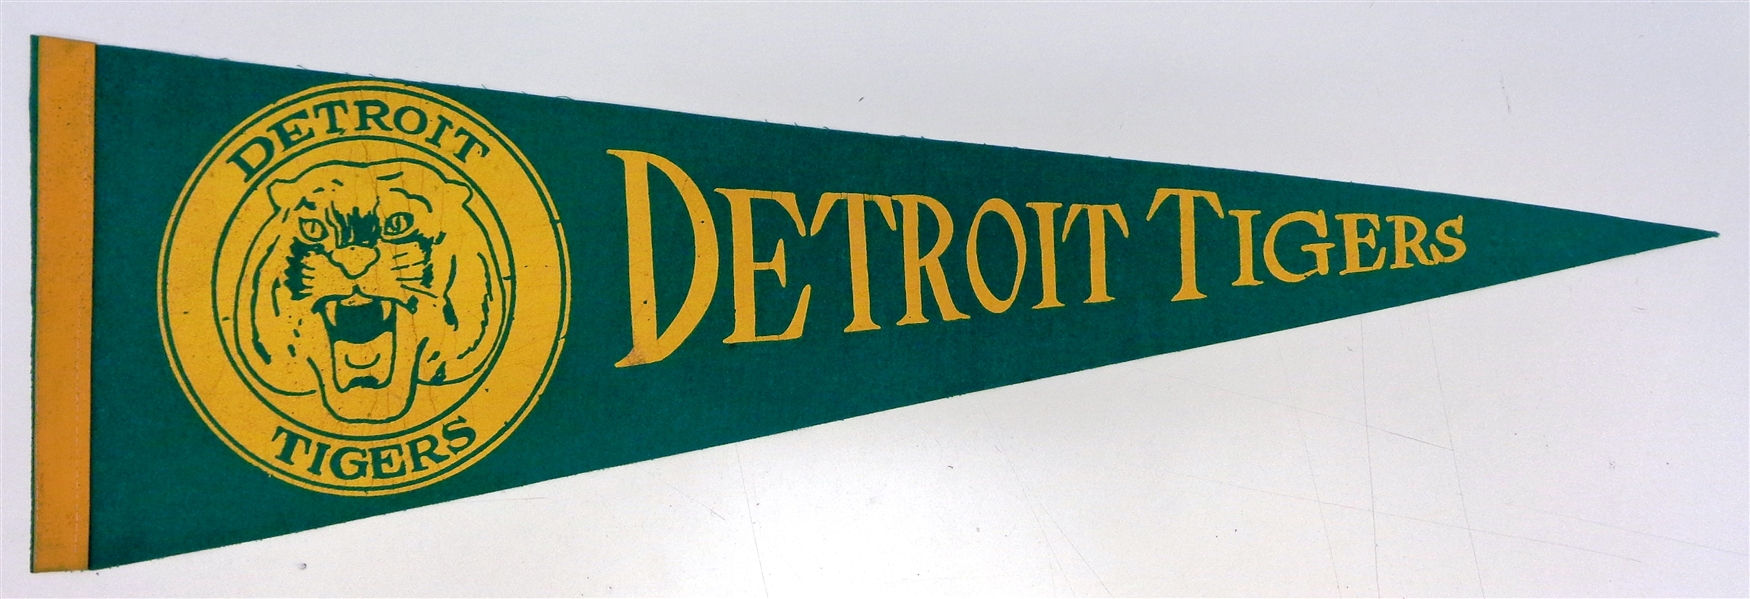 Detroit Tigers 1940s 3/4 Size Green Pennant